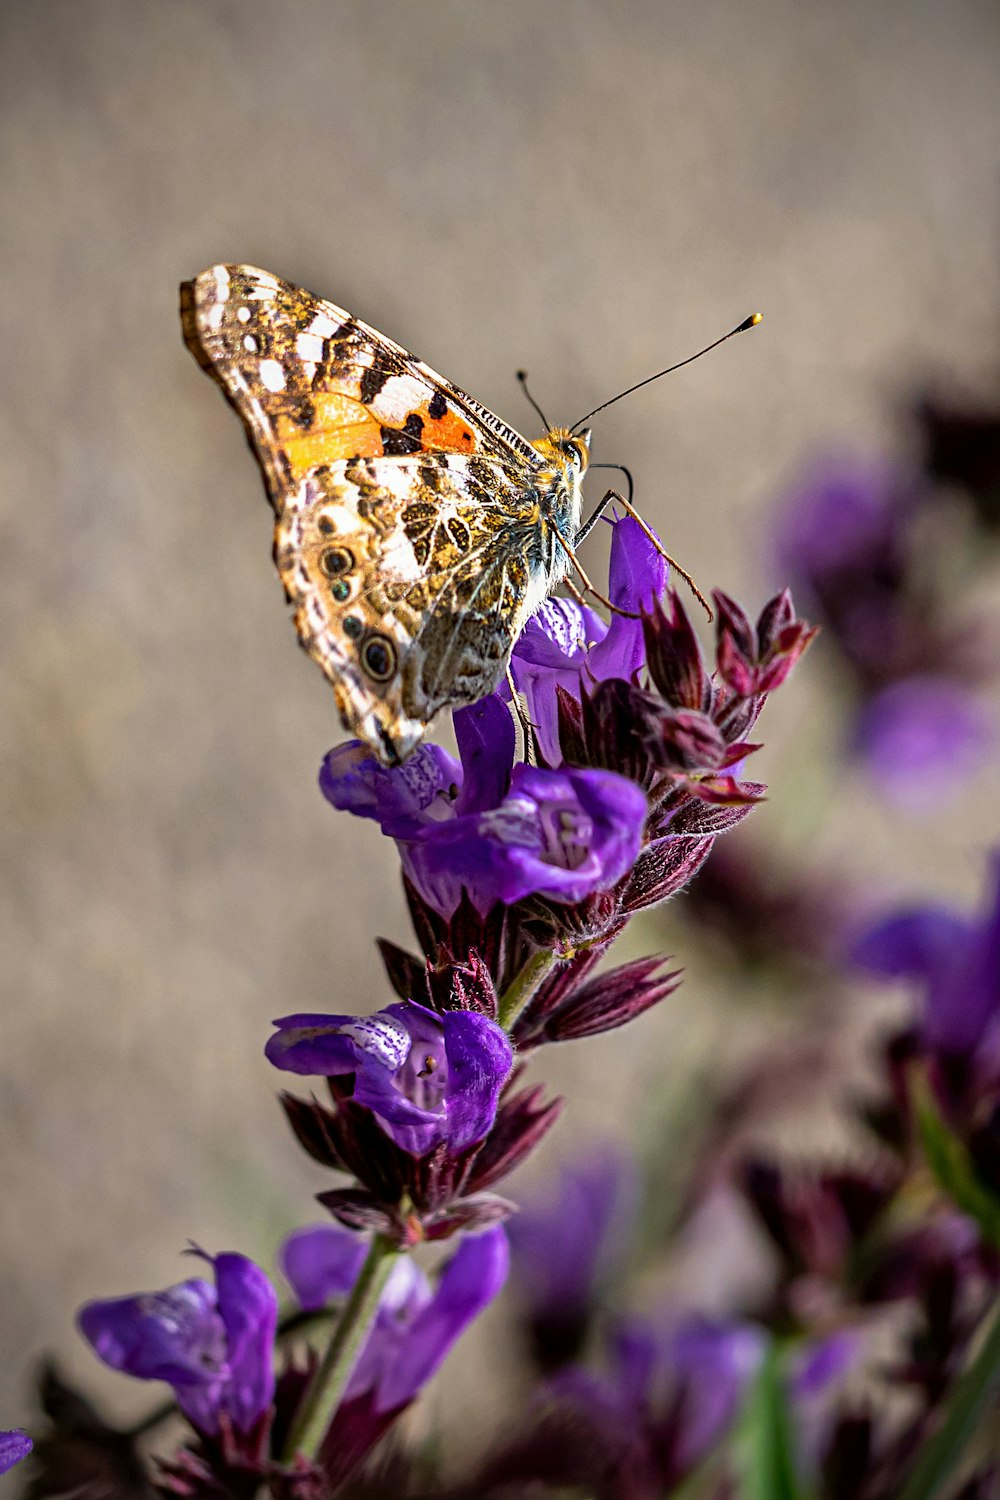 brown white and black butterfly perched on purple flower in close up photography during daytime